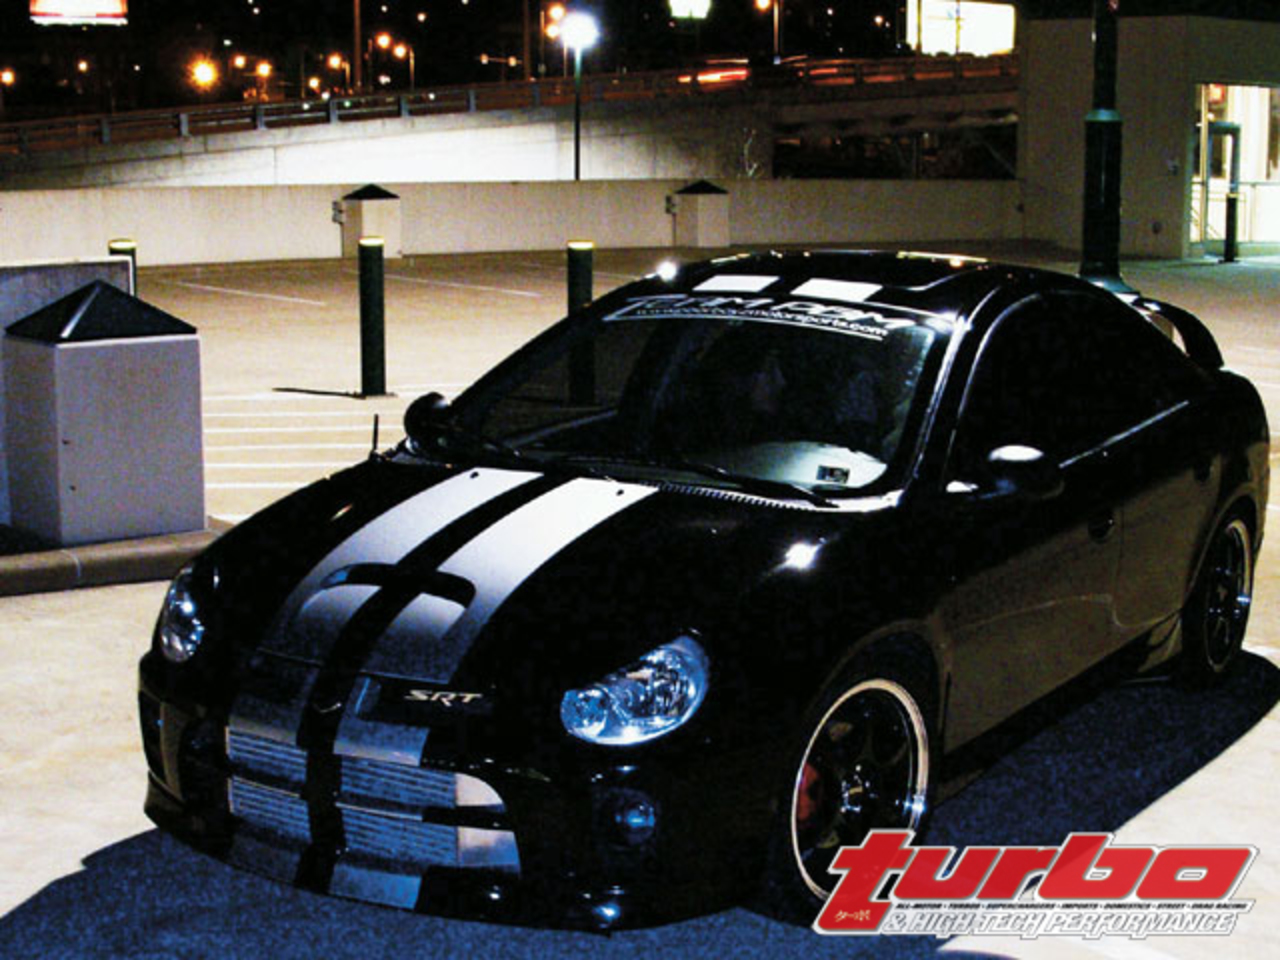 dodge srt4 related images,51 to 100 - Zuoda Images